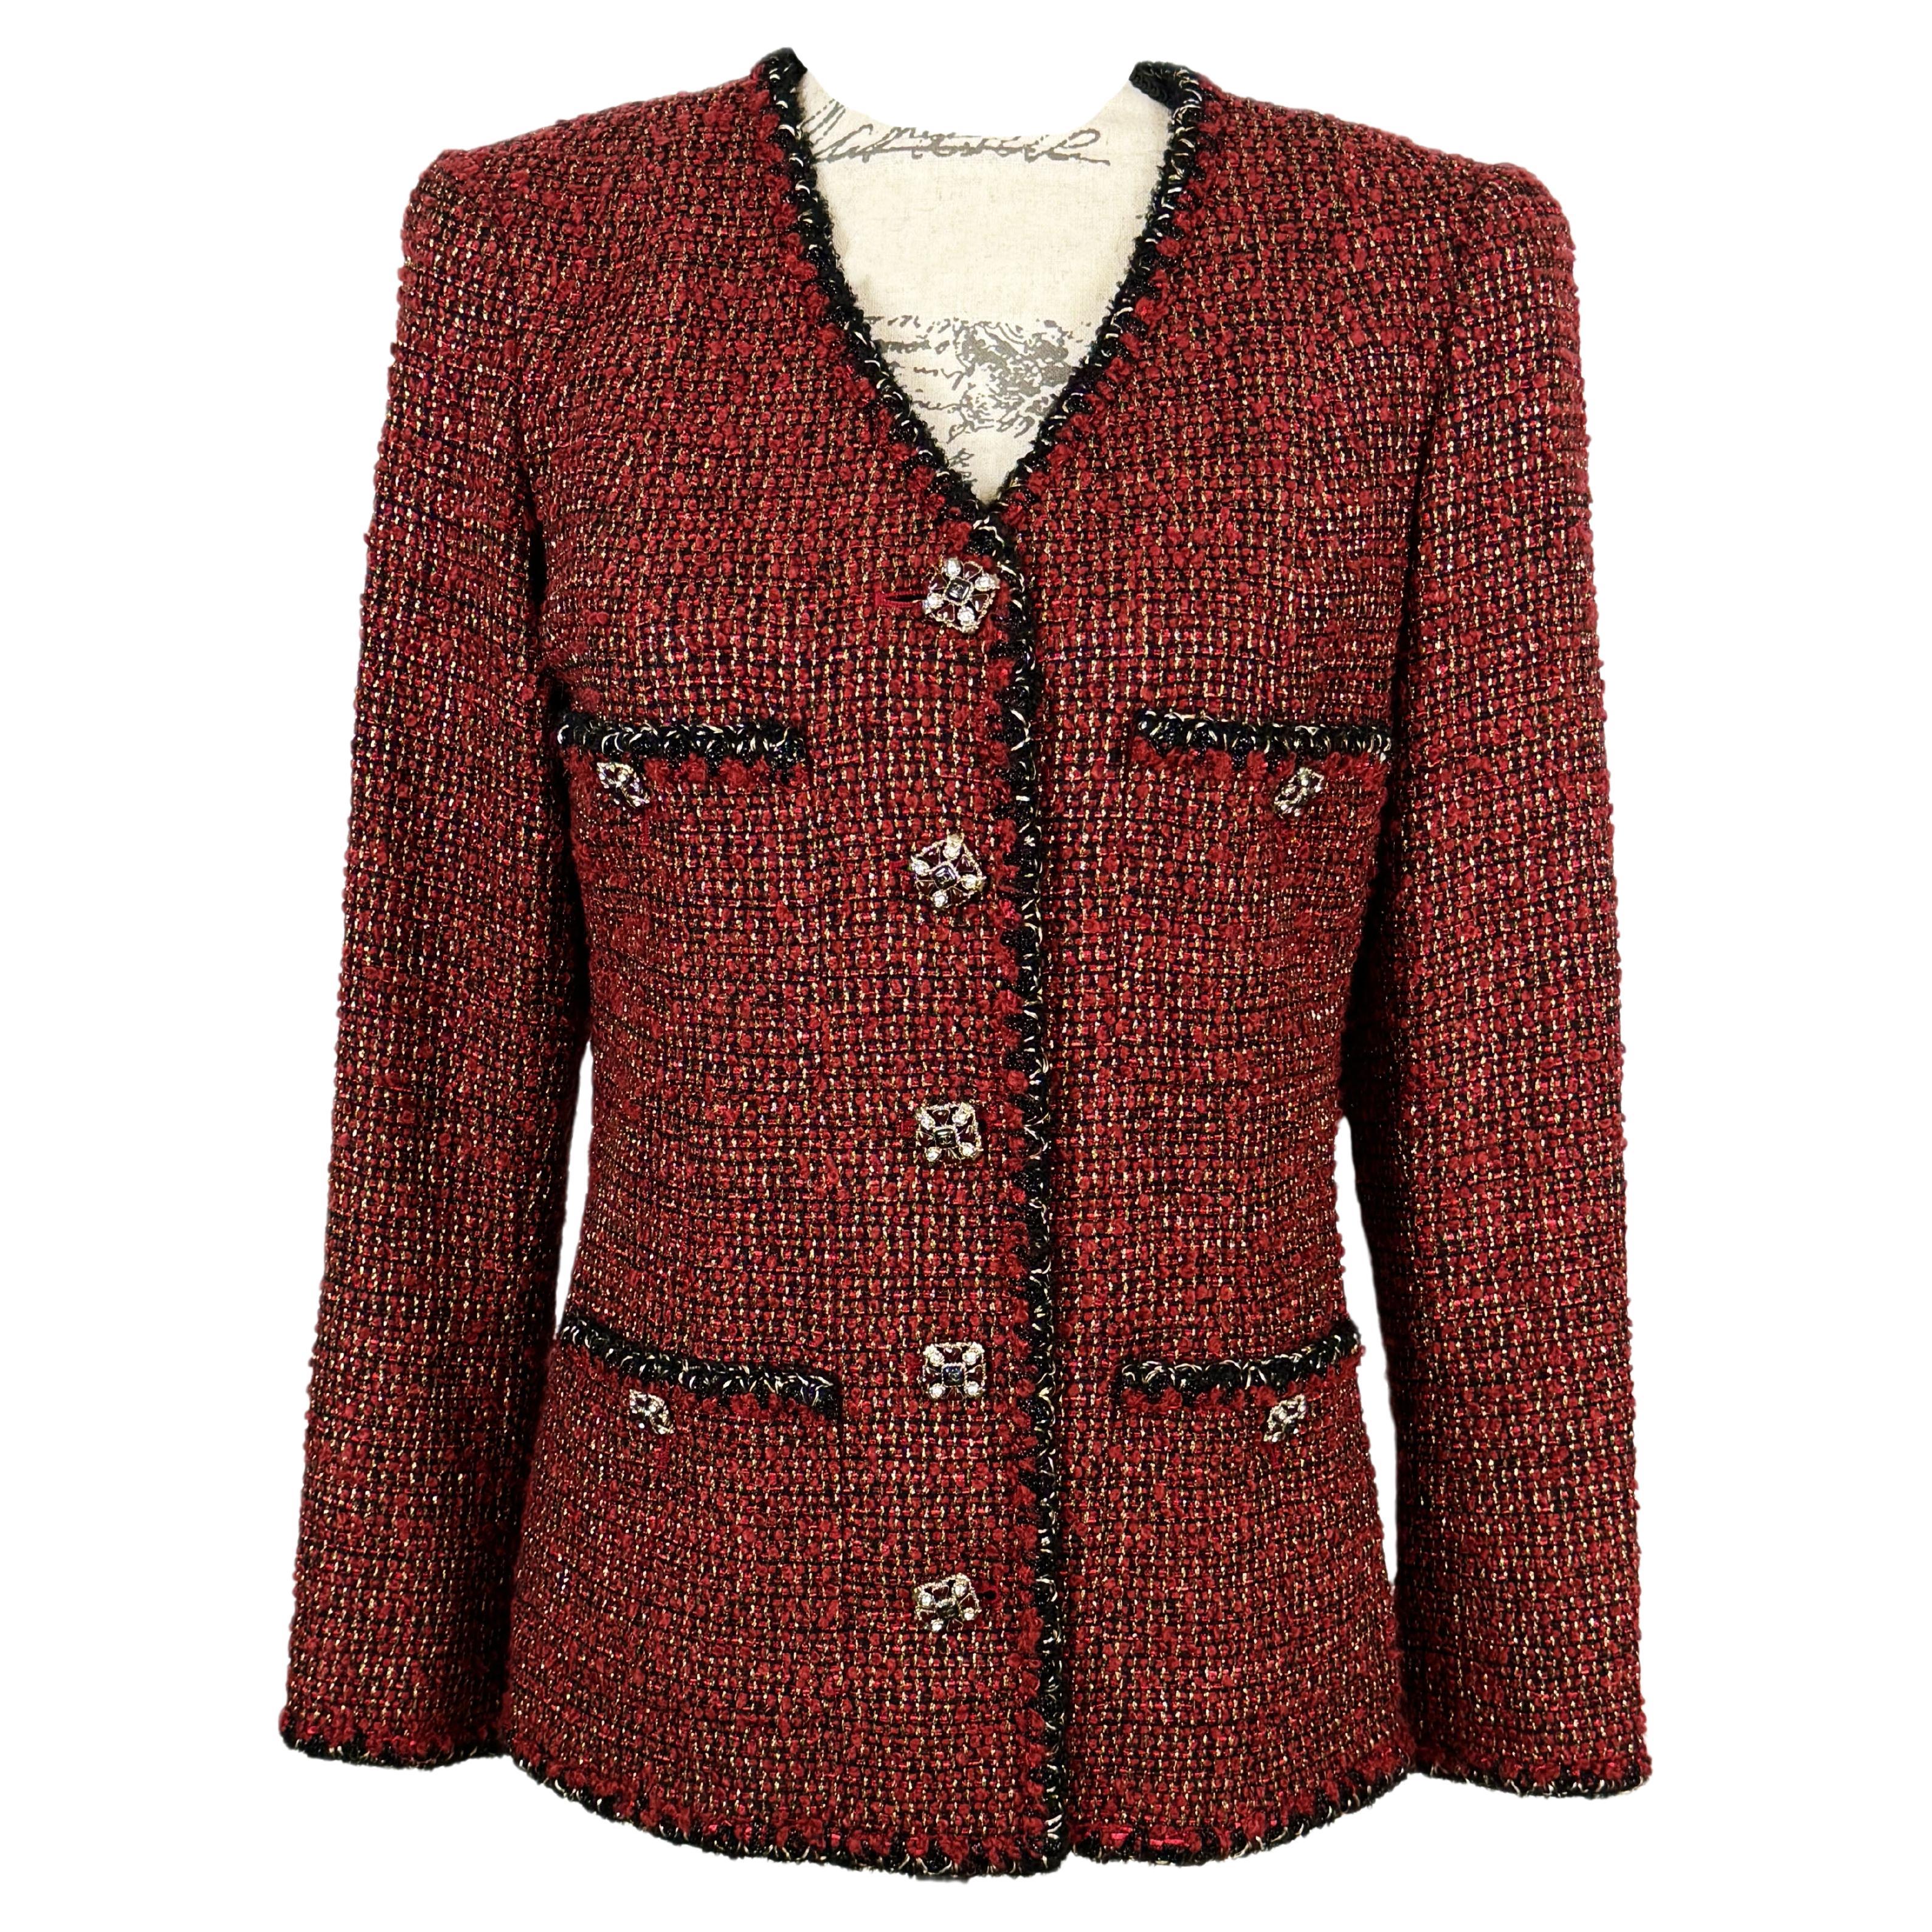 Chanel New Iconic CC Jewel Buttons Lesage Tweed Jacket